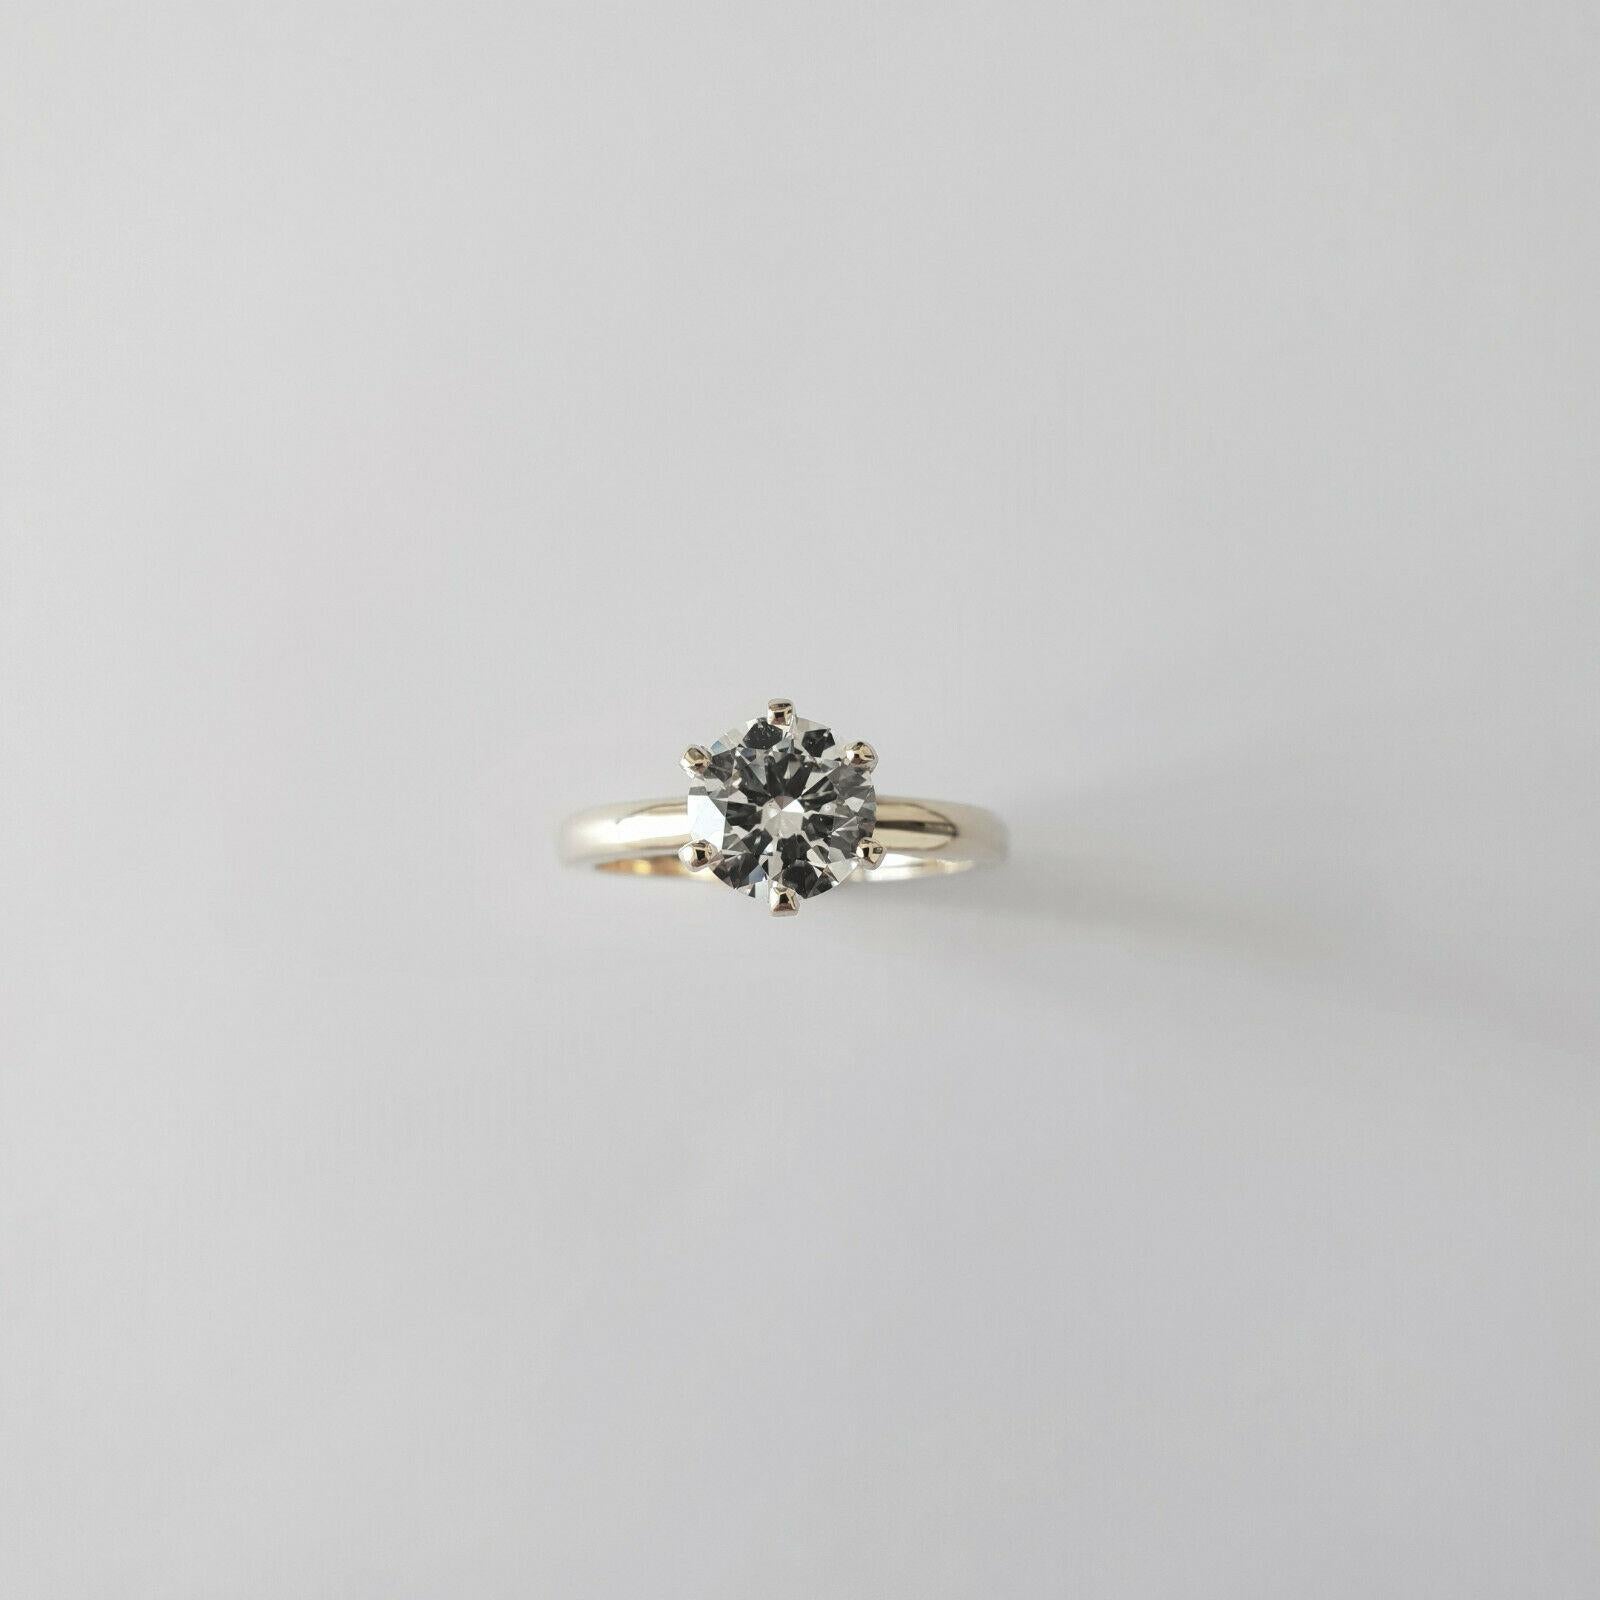 Brilliant Cut GIA Certified Diamond 1.00 Carat G/VVS2 Solitaire Ring in 6 Prong Setting For Sale